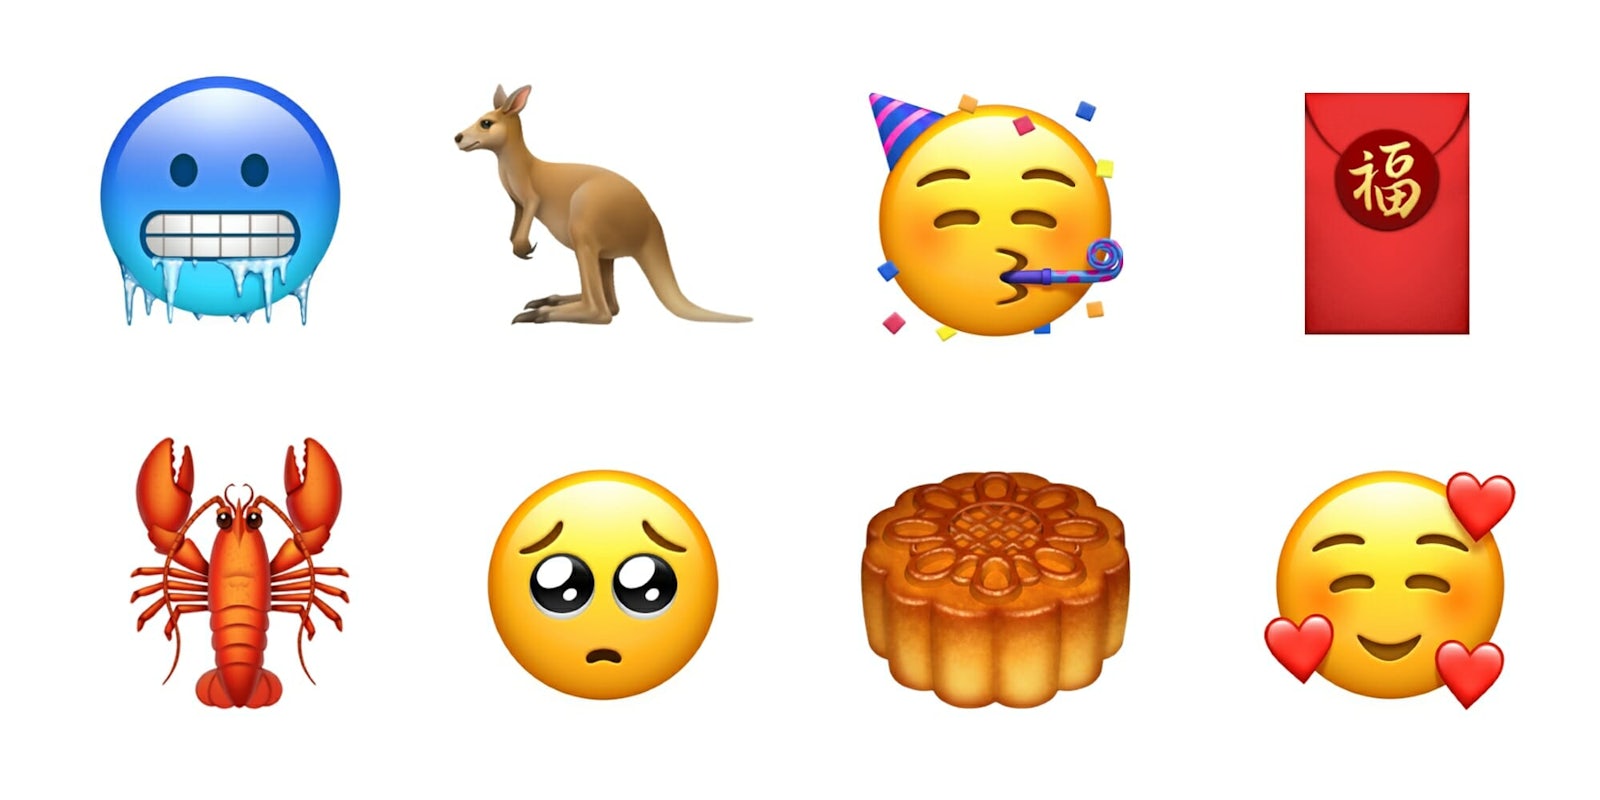 Apple is set to add over 70 new emoji into iOS 12.1